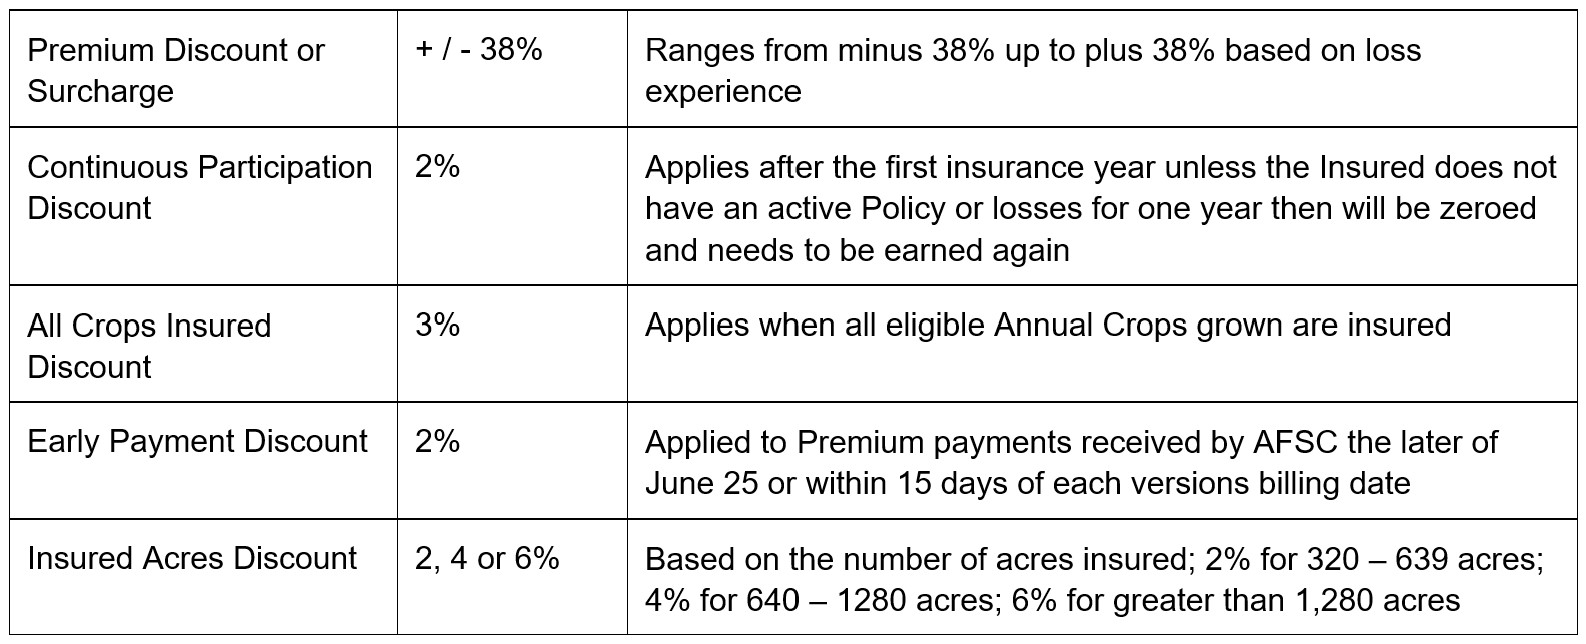 Pulse Article 2 Premium Adjustments and Discounts. Call AFSC for details